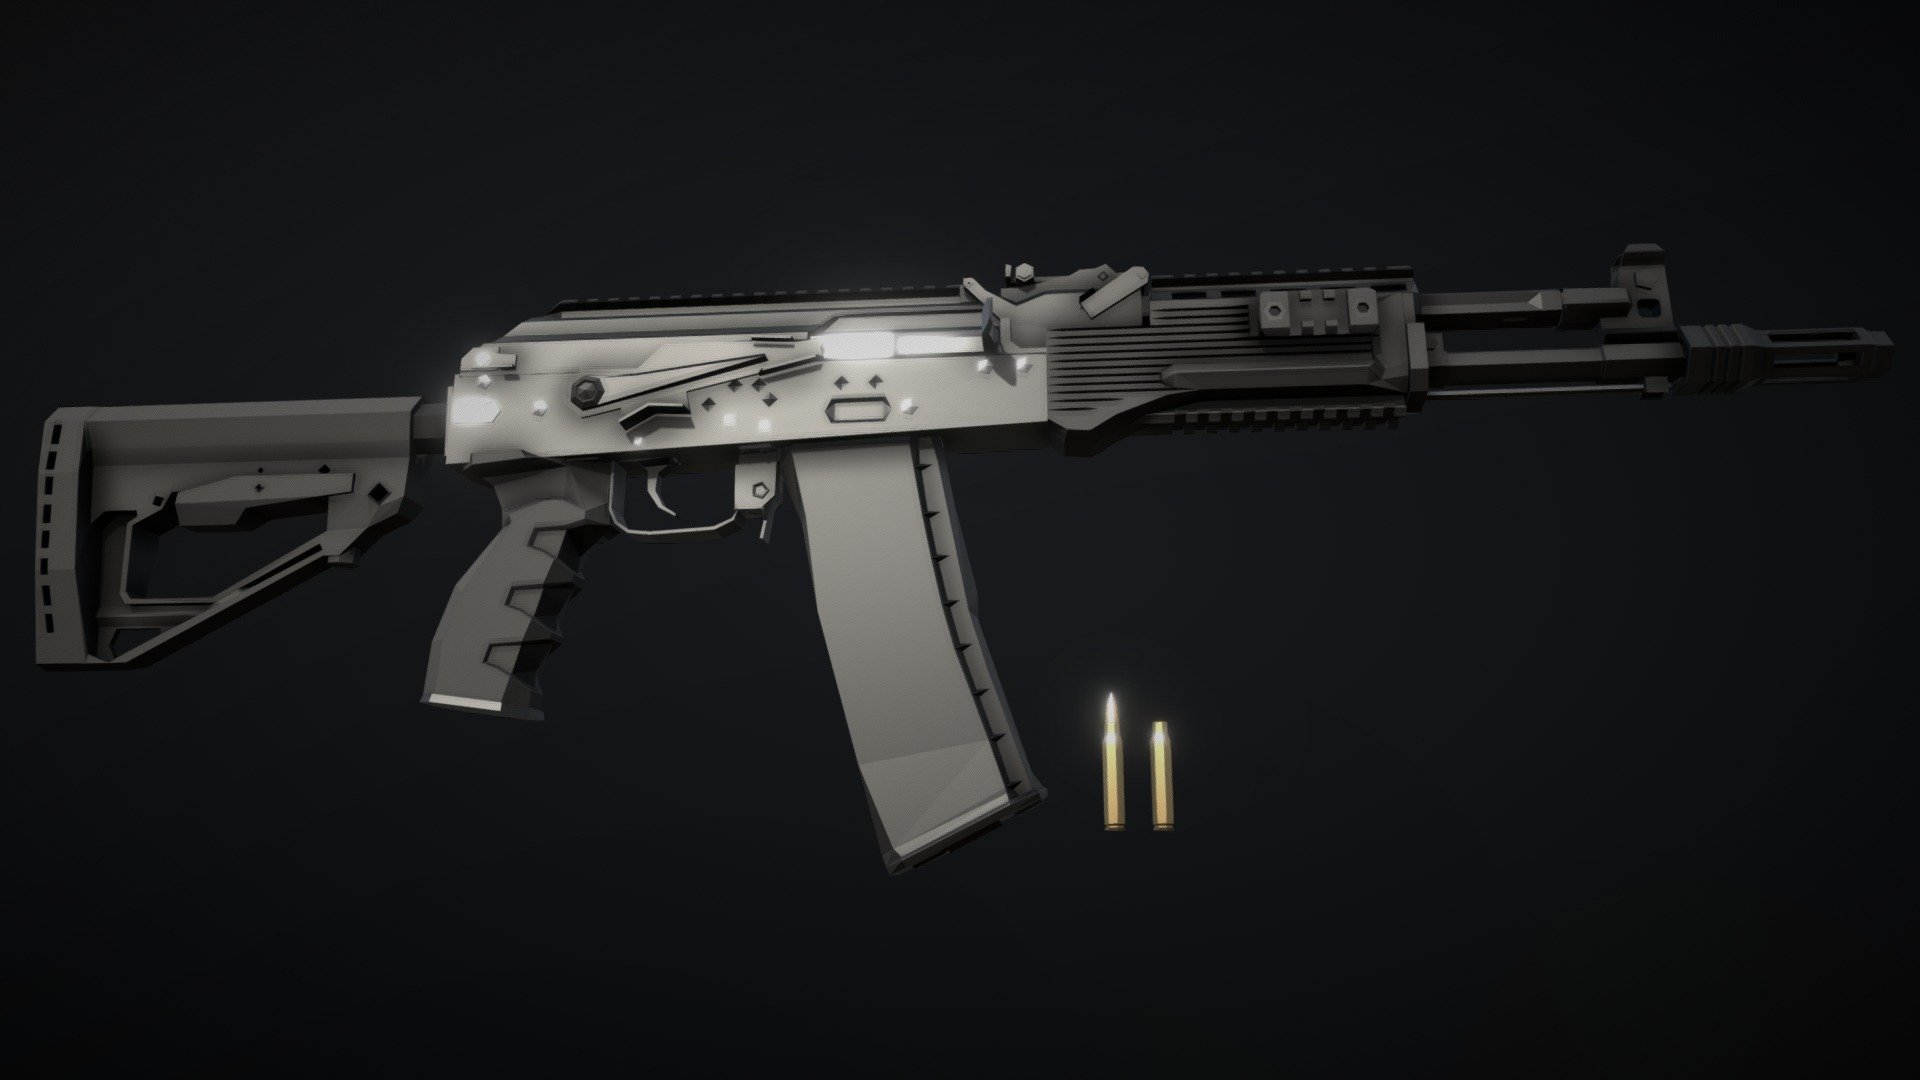 Low-Poly model of the AK-202, a carbine chambered in 5.56mm, that is part of the 200-series (also called 100-M series) of AKs 3d model